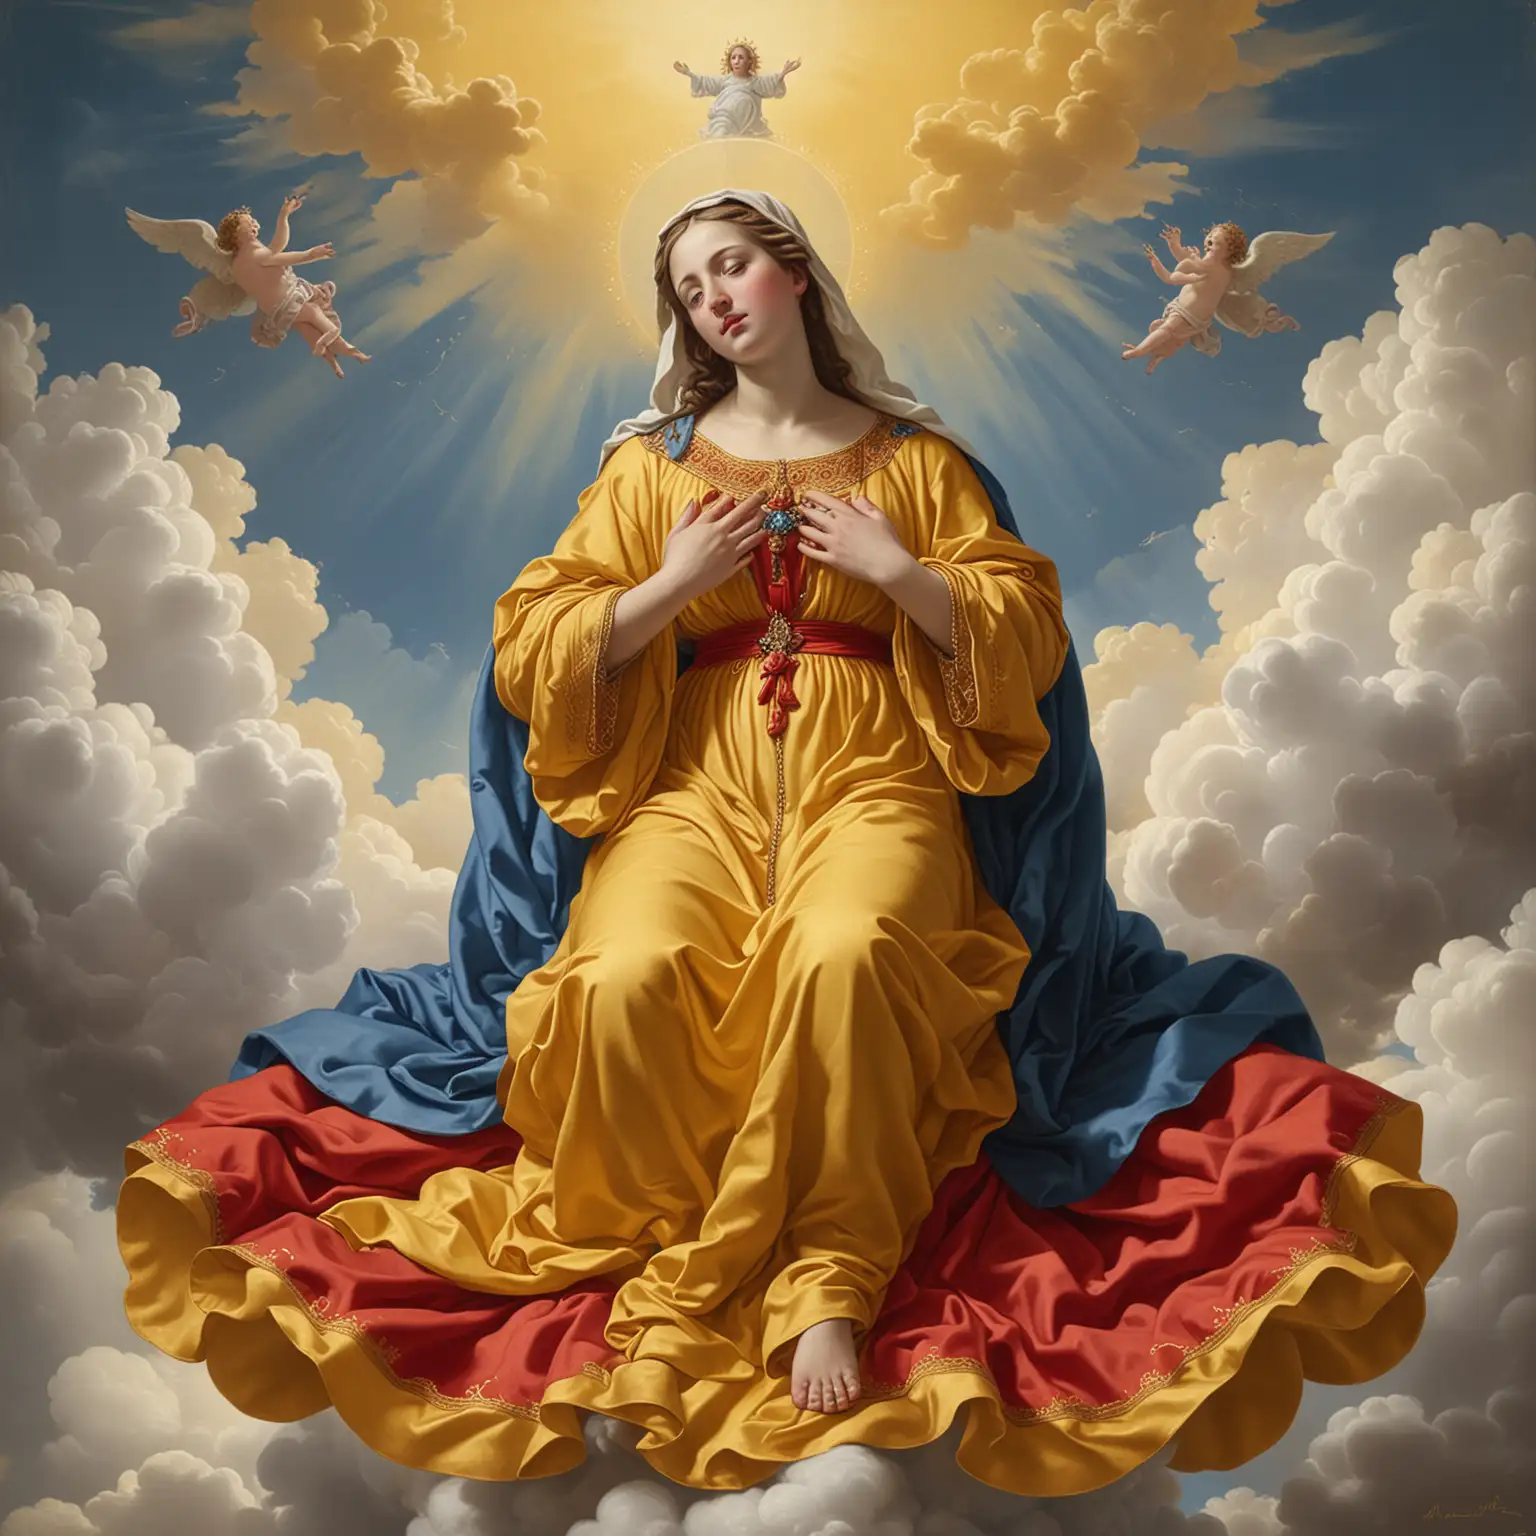 The Virgin Mary in ScarletRed Dress on Yellow Cloud Giovanni Gasparro Style